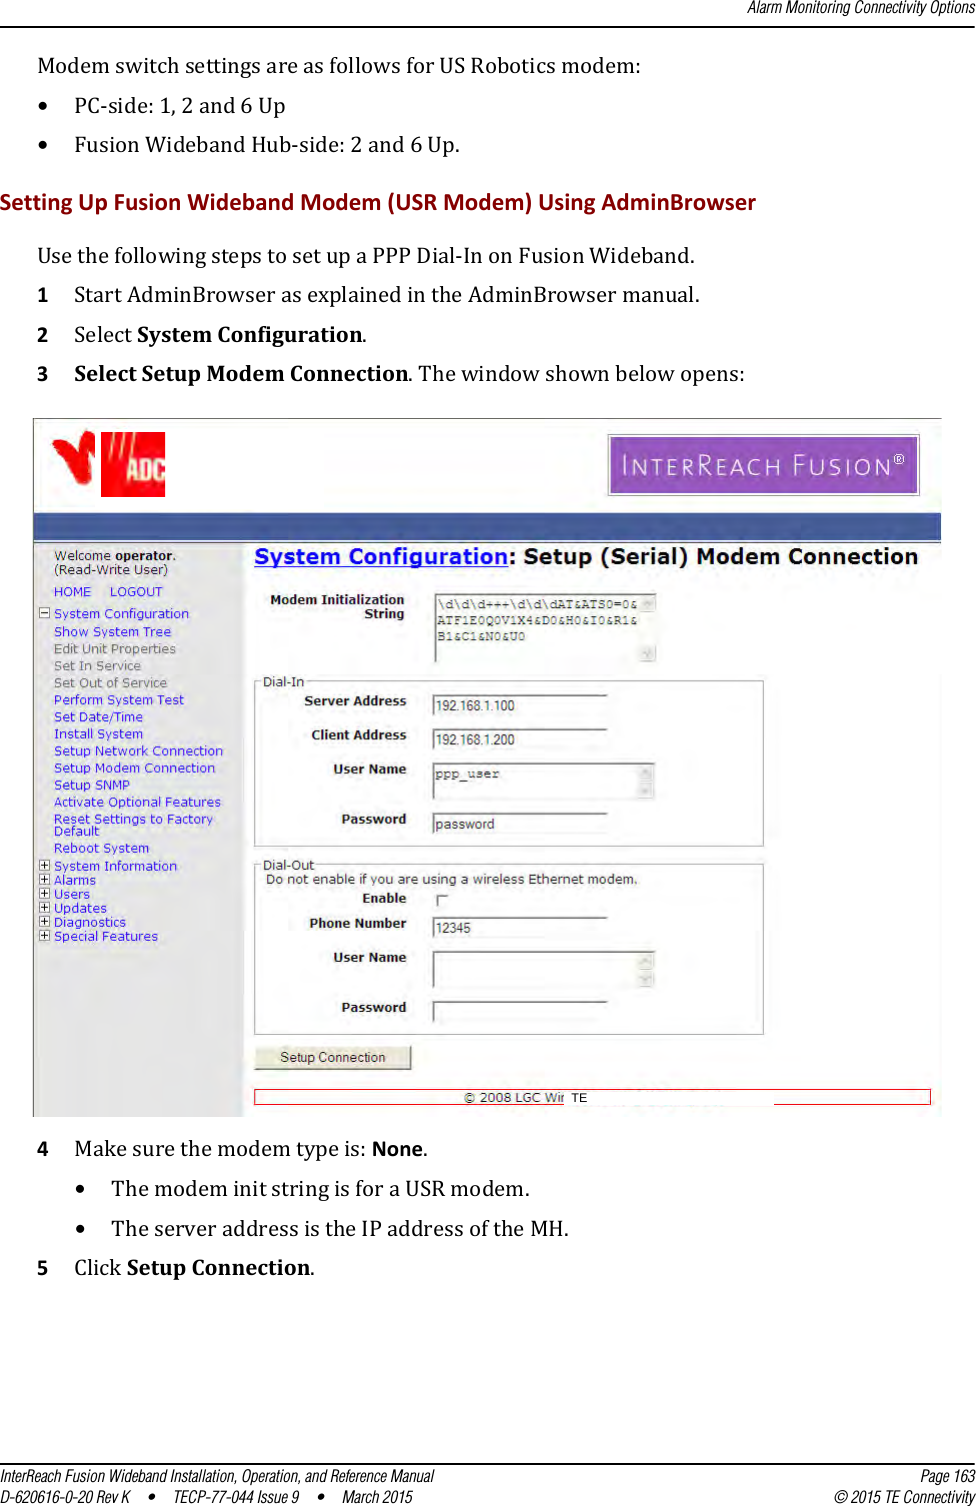 Alarm Monitoring Connectivity OptionsInterReach Fusion Wideband Installation, Operation, and Reference Manual Page 163D-620616-0-20 Rev K  •  TECP-77-044 Issue 9  •  March 2015 © 2015 TE ConnectivityModem switch settings are as follows for US Robotics modem:•PC-side: 1, 2 and 6 Up •Fusion Wideband Hub-side: 2 and 6 Up.Setting Up Fusion Wideband Modem (USR Modem) Using AdminBrowserUse the following steps to set up a PPP Dial-In on Fusion Wideband.1Start AdminBrowser as explained in the AdminBrowser manual.2Select System Configuration.3Select Setup Modem Connection. The window shown below opens:4Make sure the modem type is: None.•The modem init string is for a USR modem.•The server address is the IP address of the MH.5Click Setup Connection.TE